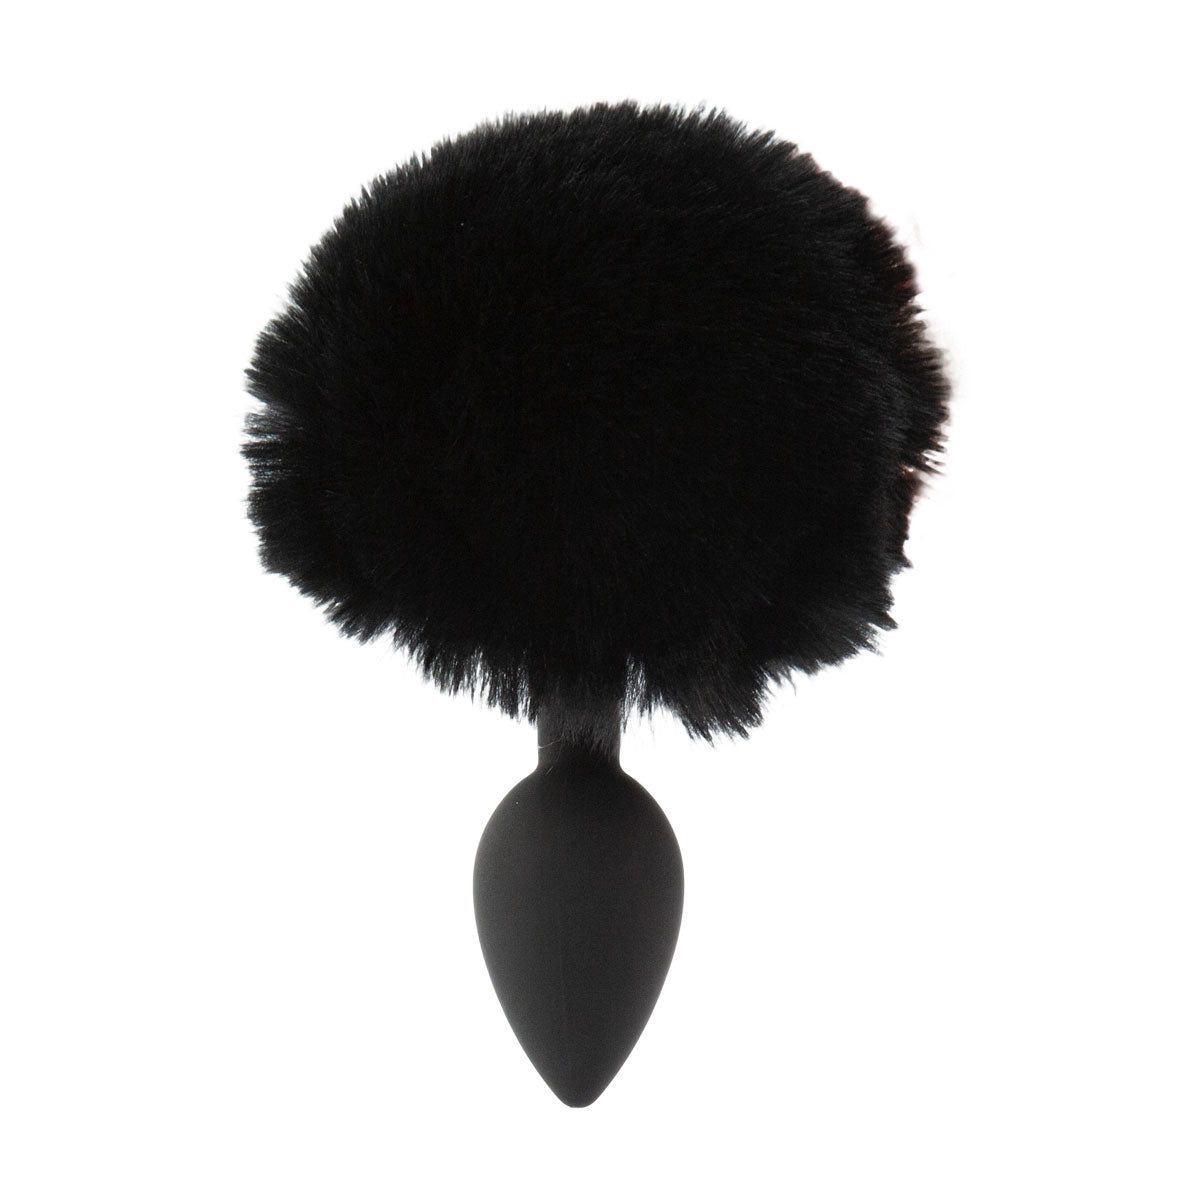 Pure Love® - Fluffy Bunny Tail Silicone Anal Plug – Black